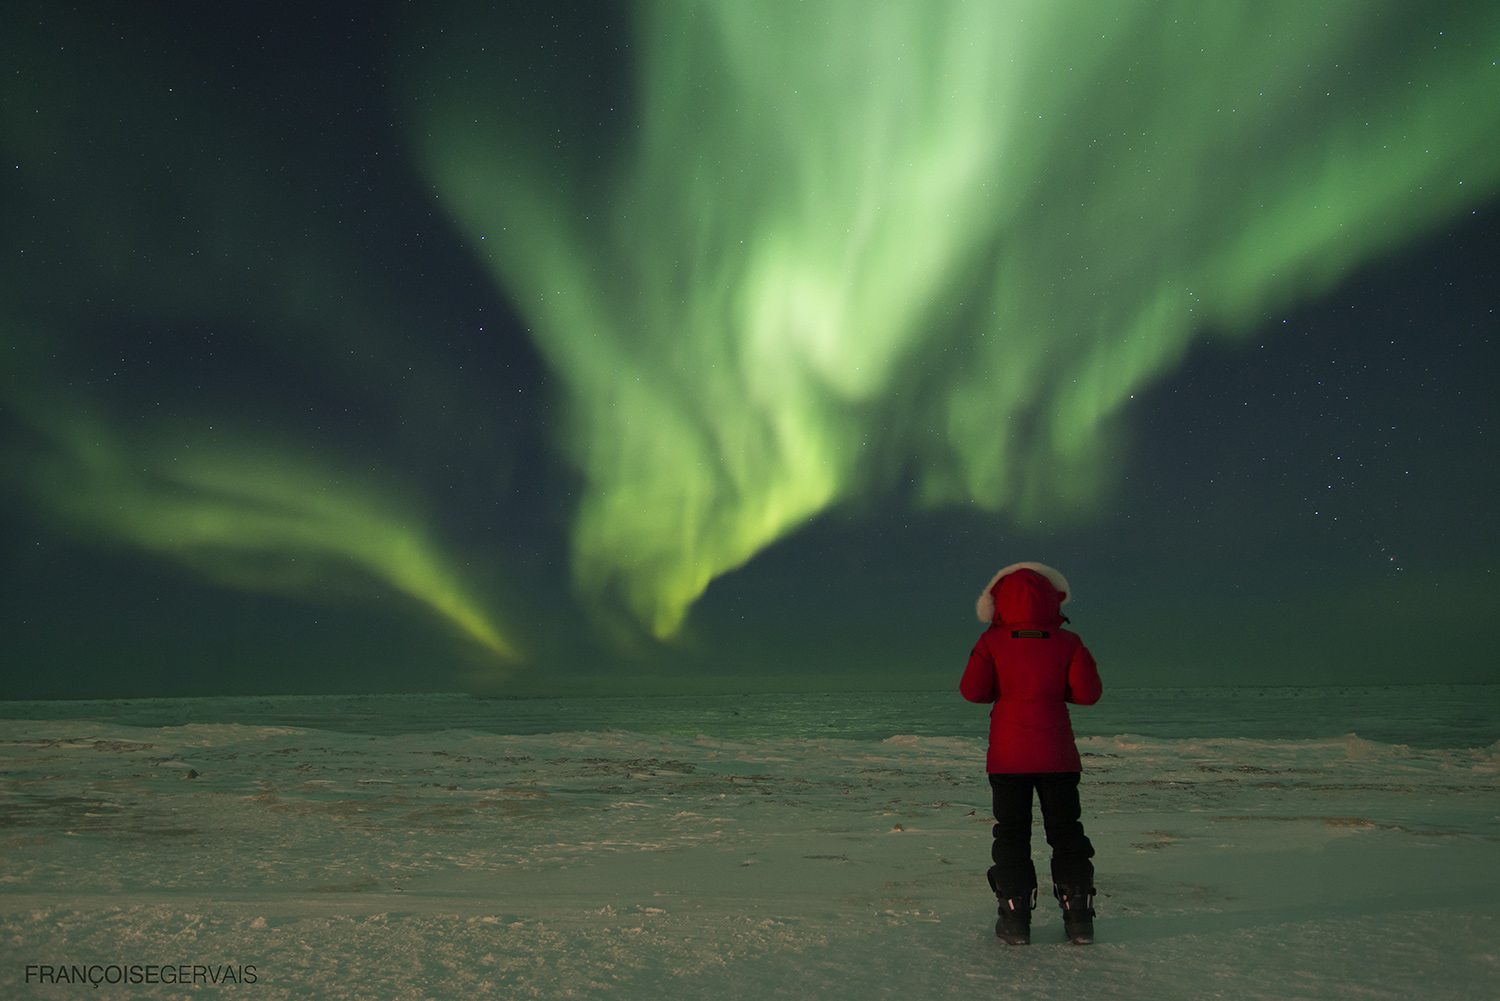 small-Arctic-Kingdom-FRANCOISE-GERVAISE-northern-lights-with-person-standing-watching-DSC_2148_3